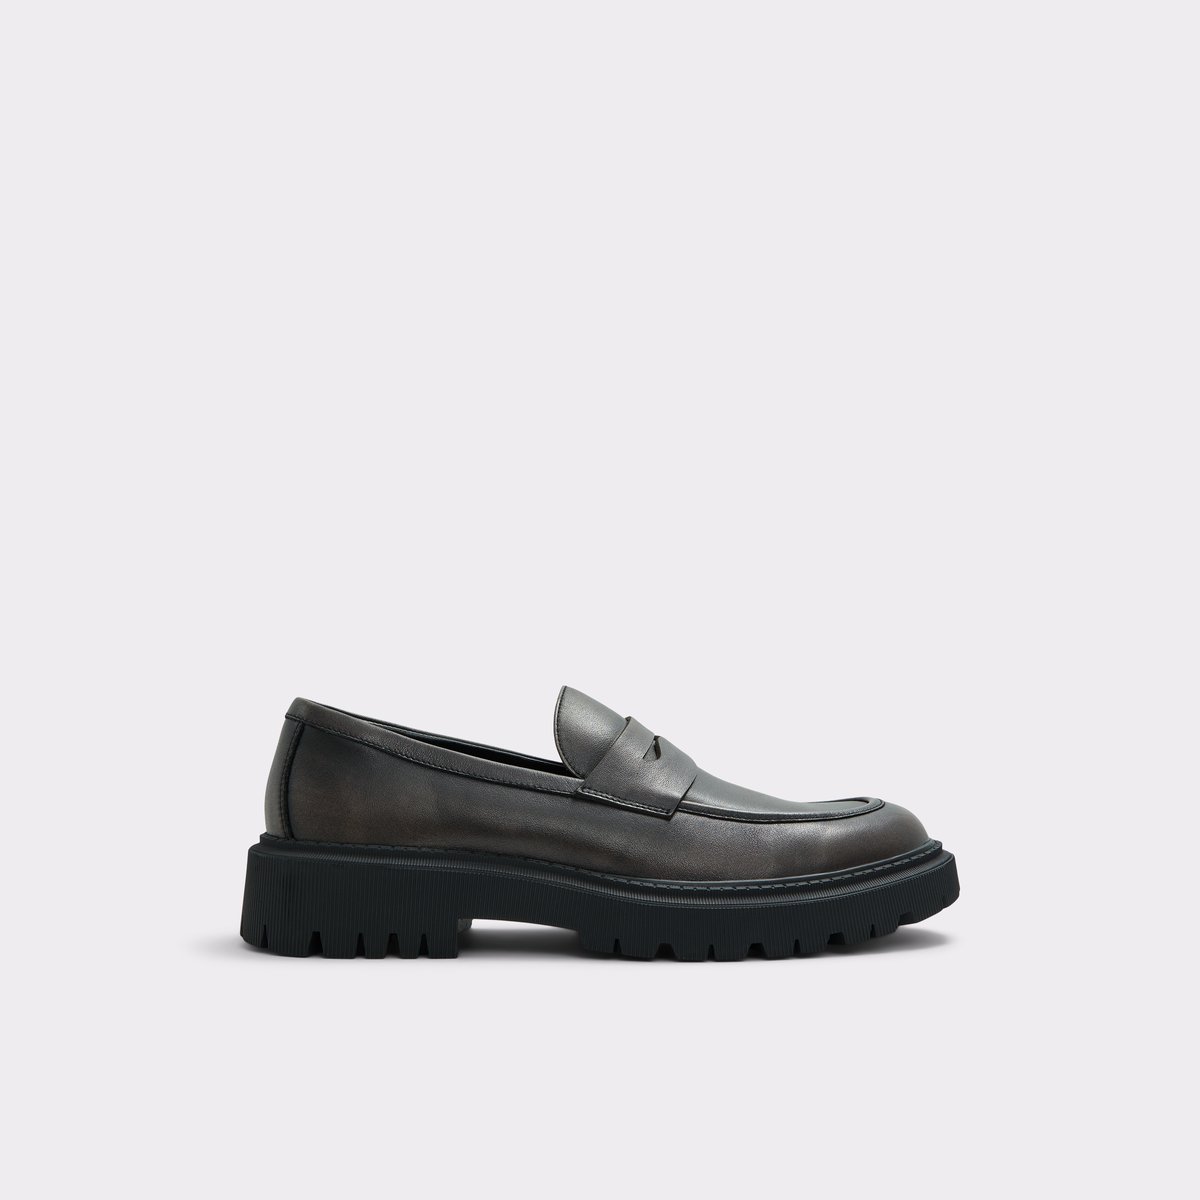 Exeter Black Leather Distressed Men's Loafers & Slip-Ons | ALDO Canada